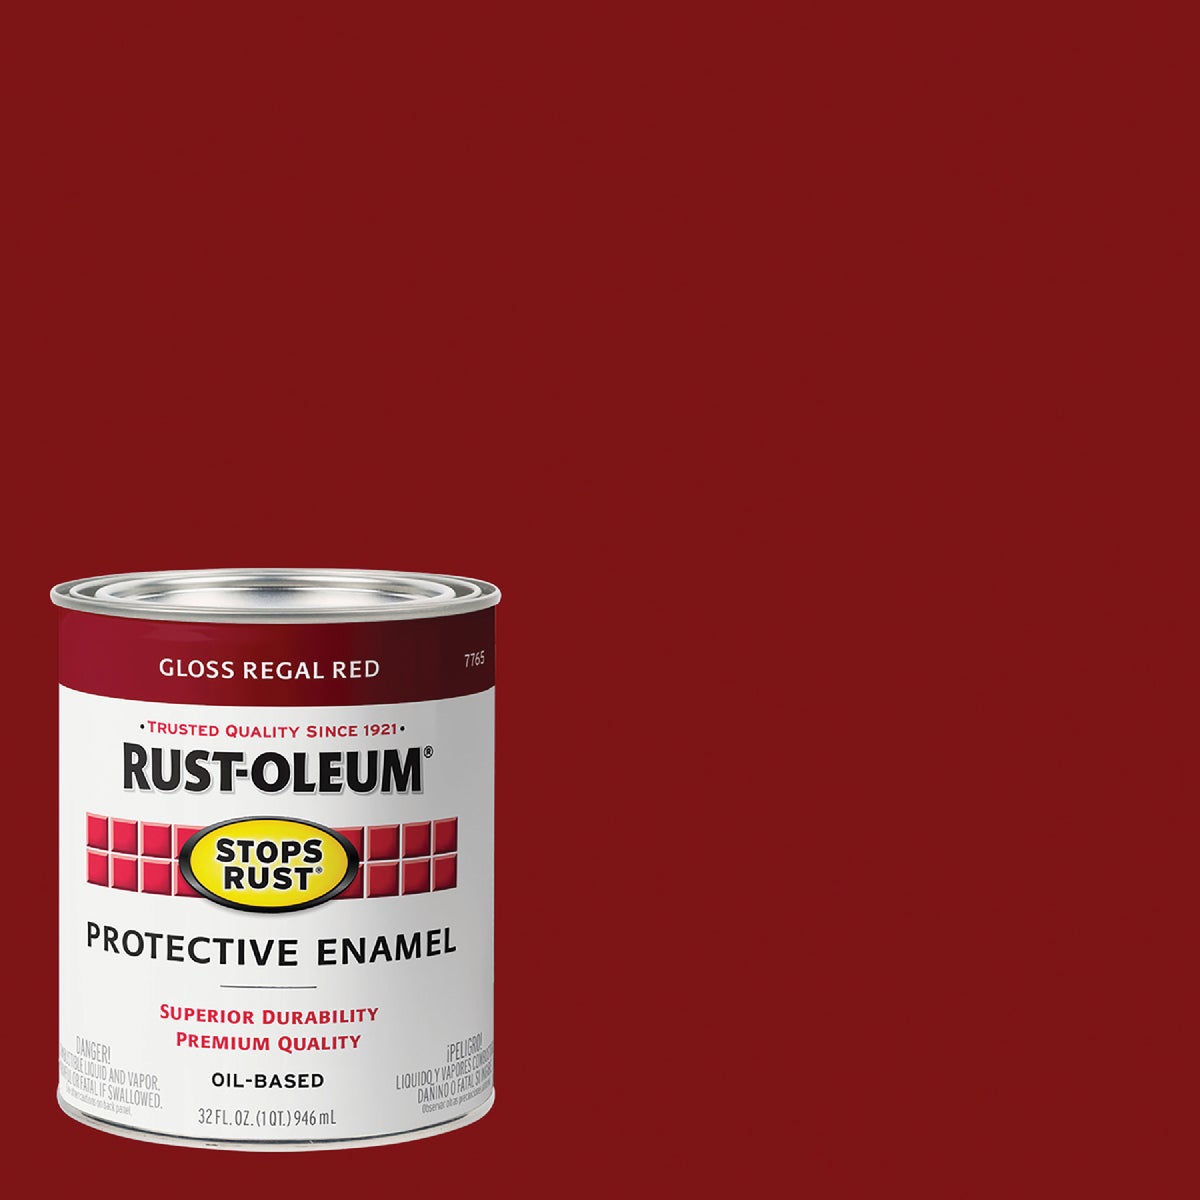 Rust-Oleum Stops Rust Oil Based Gloss Protective Rust Control Enamel, Regal Red, 1 Qt.